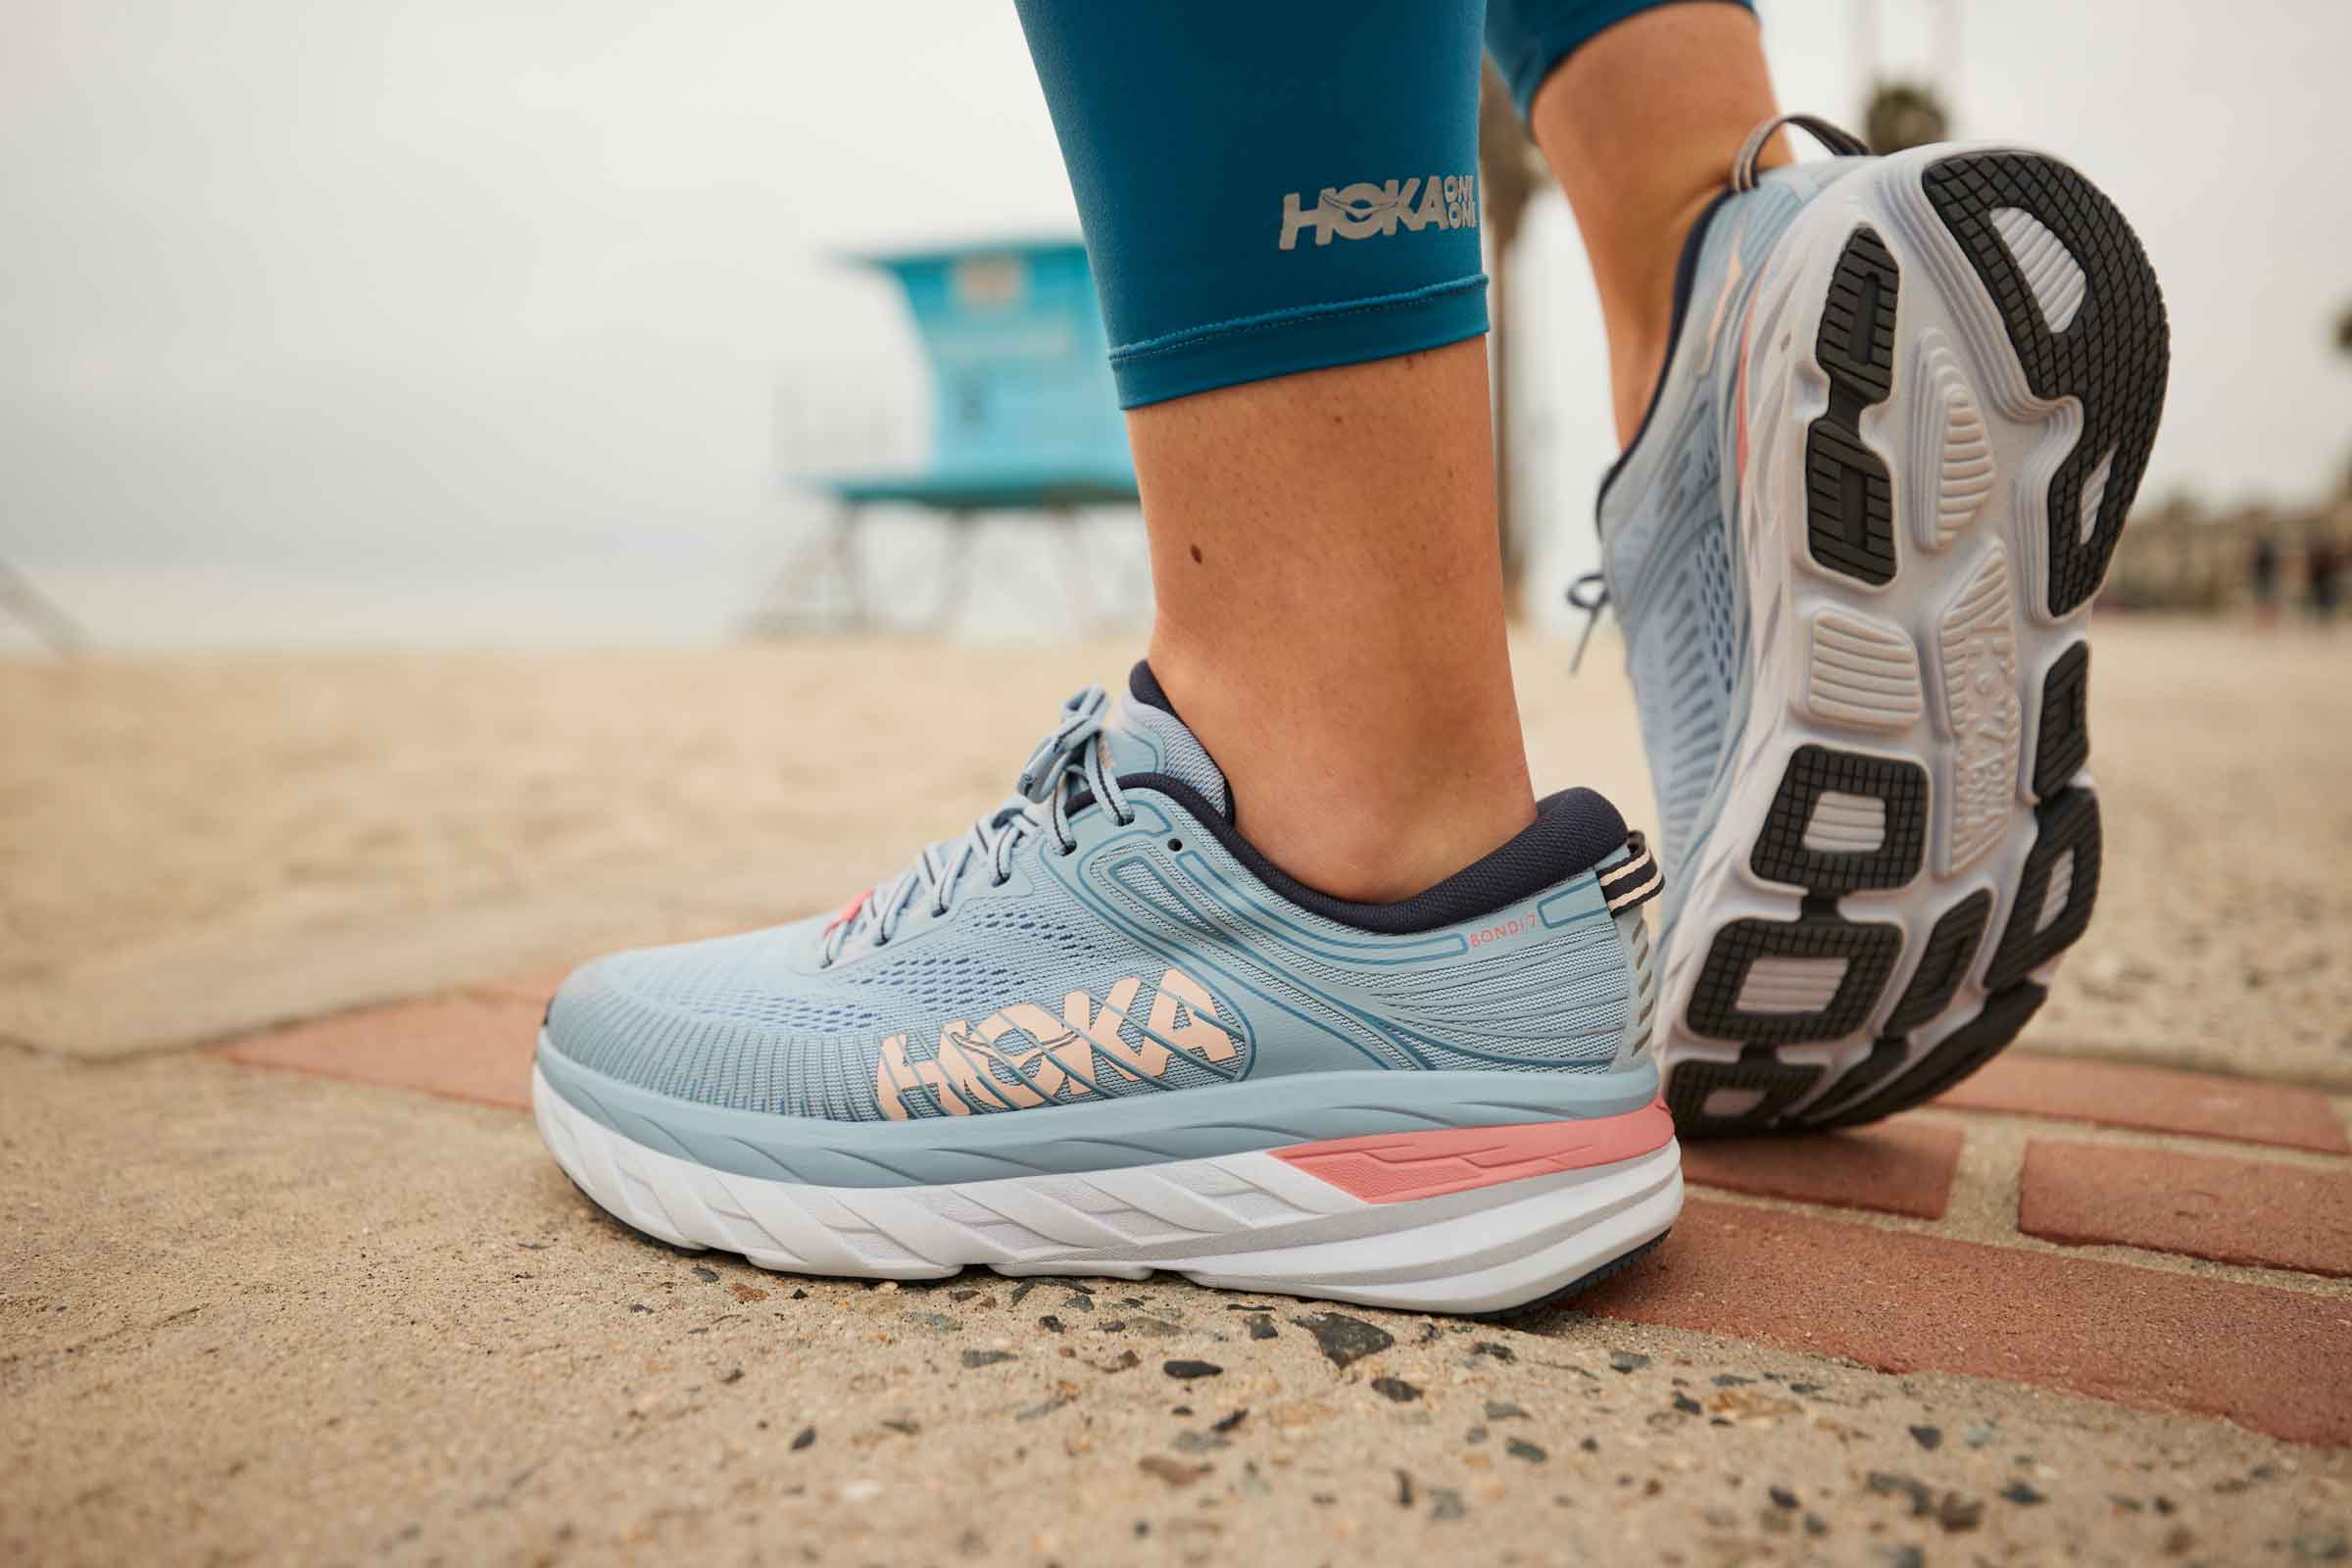 Can You Return Hoka Shoes After Wearing Them?